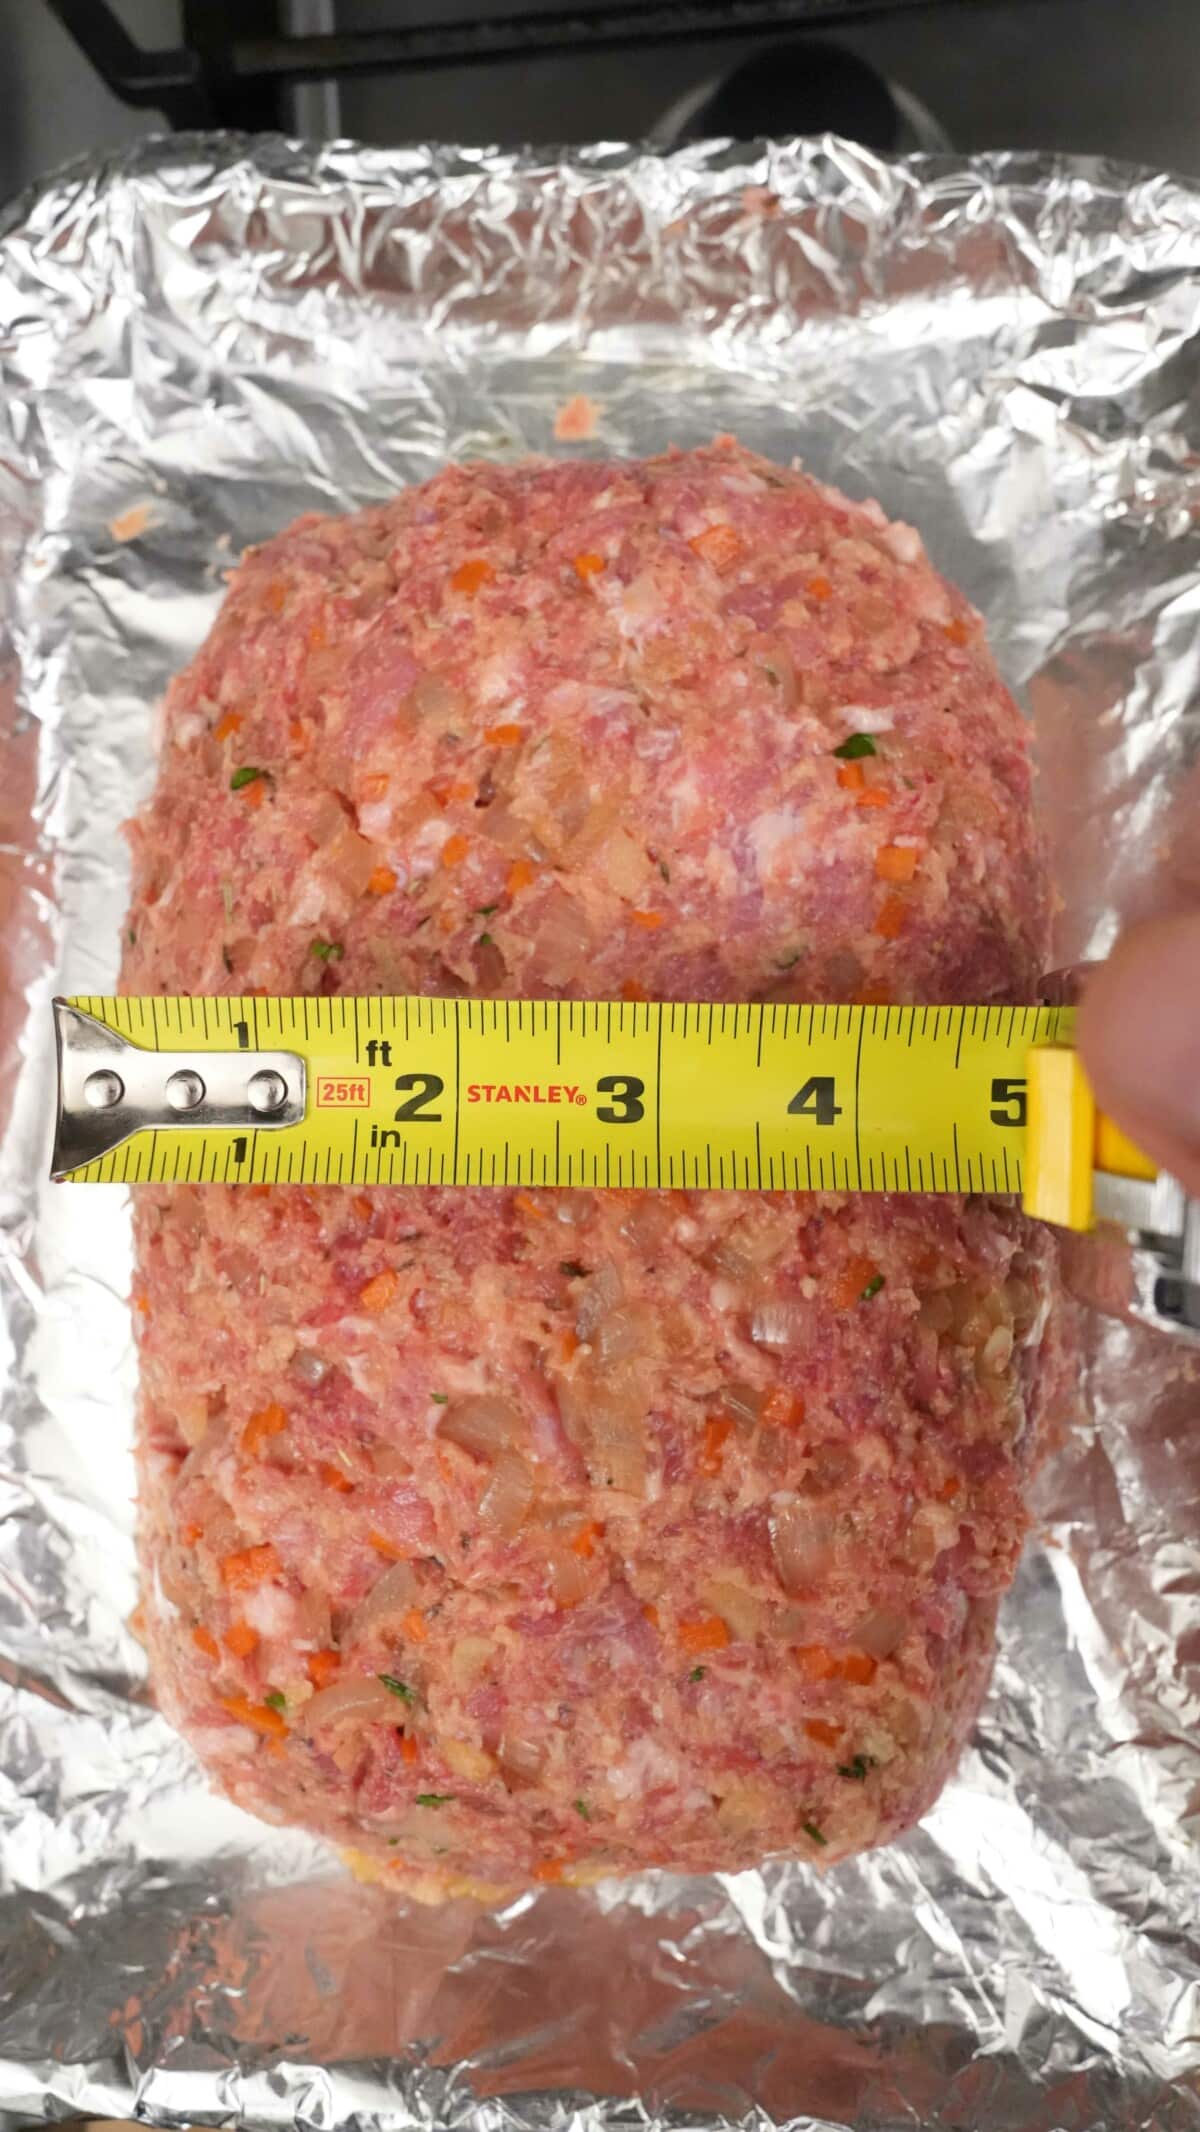 A measuring tape showing the width of the meatloaf.